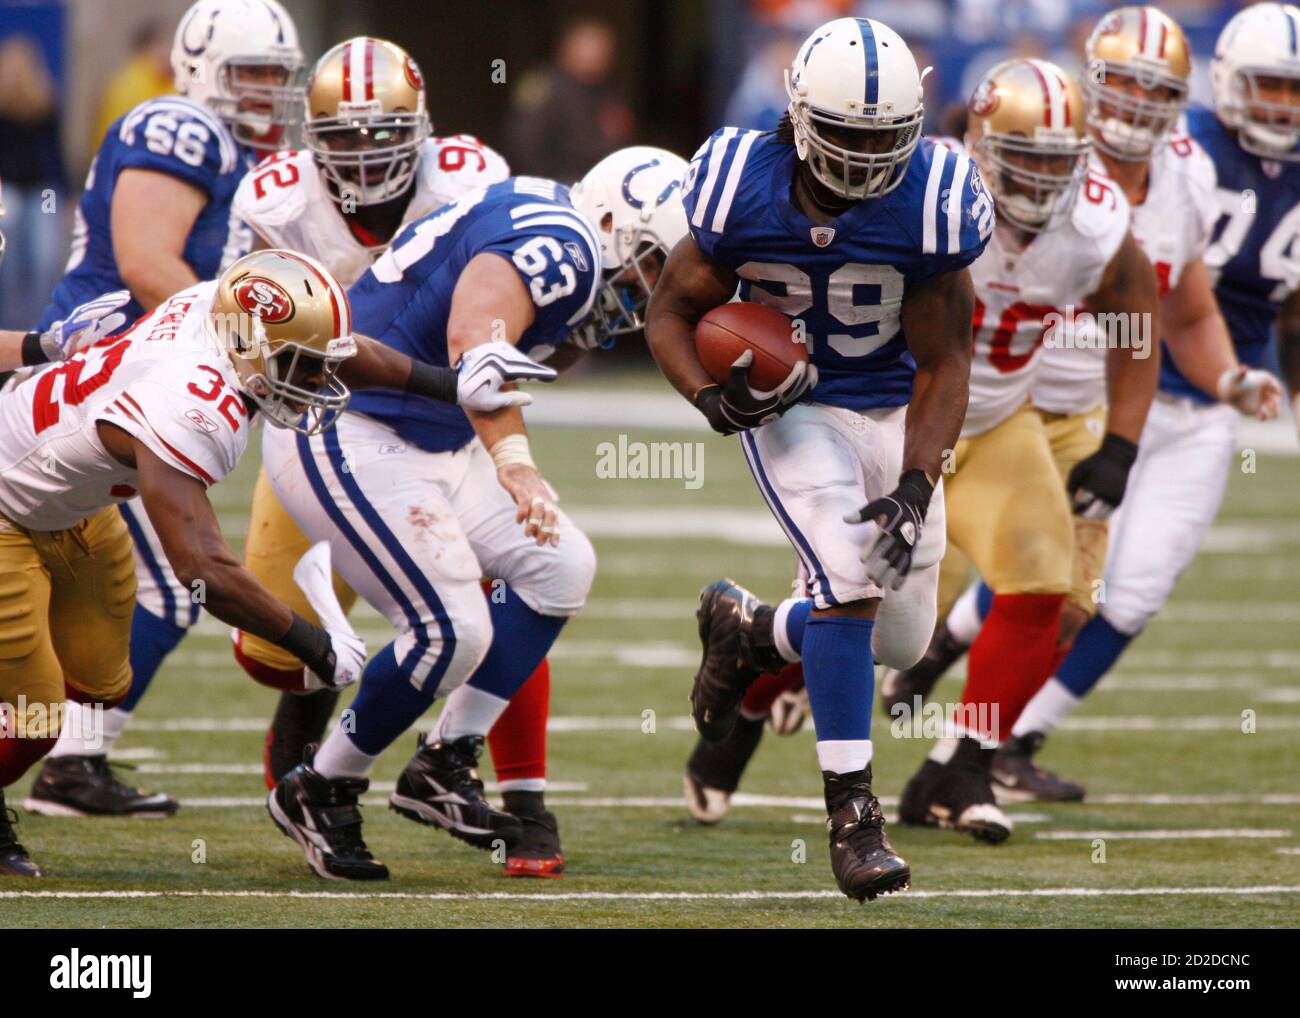 Indianapolis Colts running back Joseph Addai (29) outruns several San Francisco 49ers during their NFL football game in Indianapolis November 1, 2009. REUTERS/Brent Smith (UNITED STATES SPORT FOOTBALL) Stock Photo